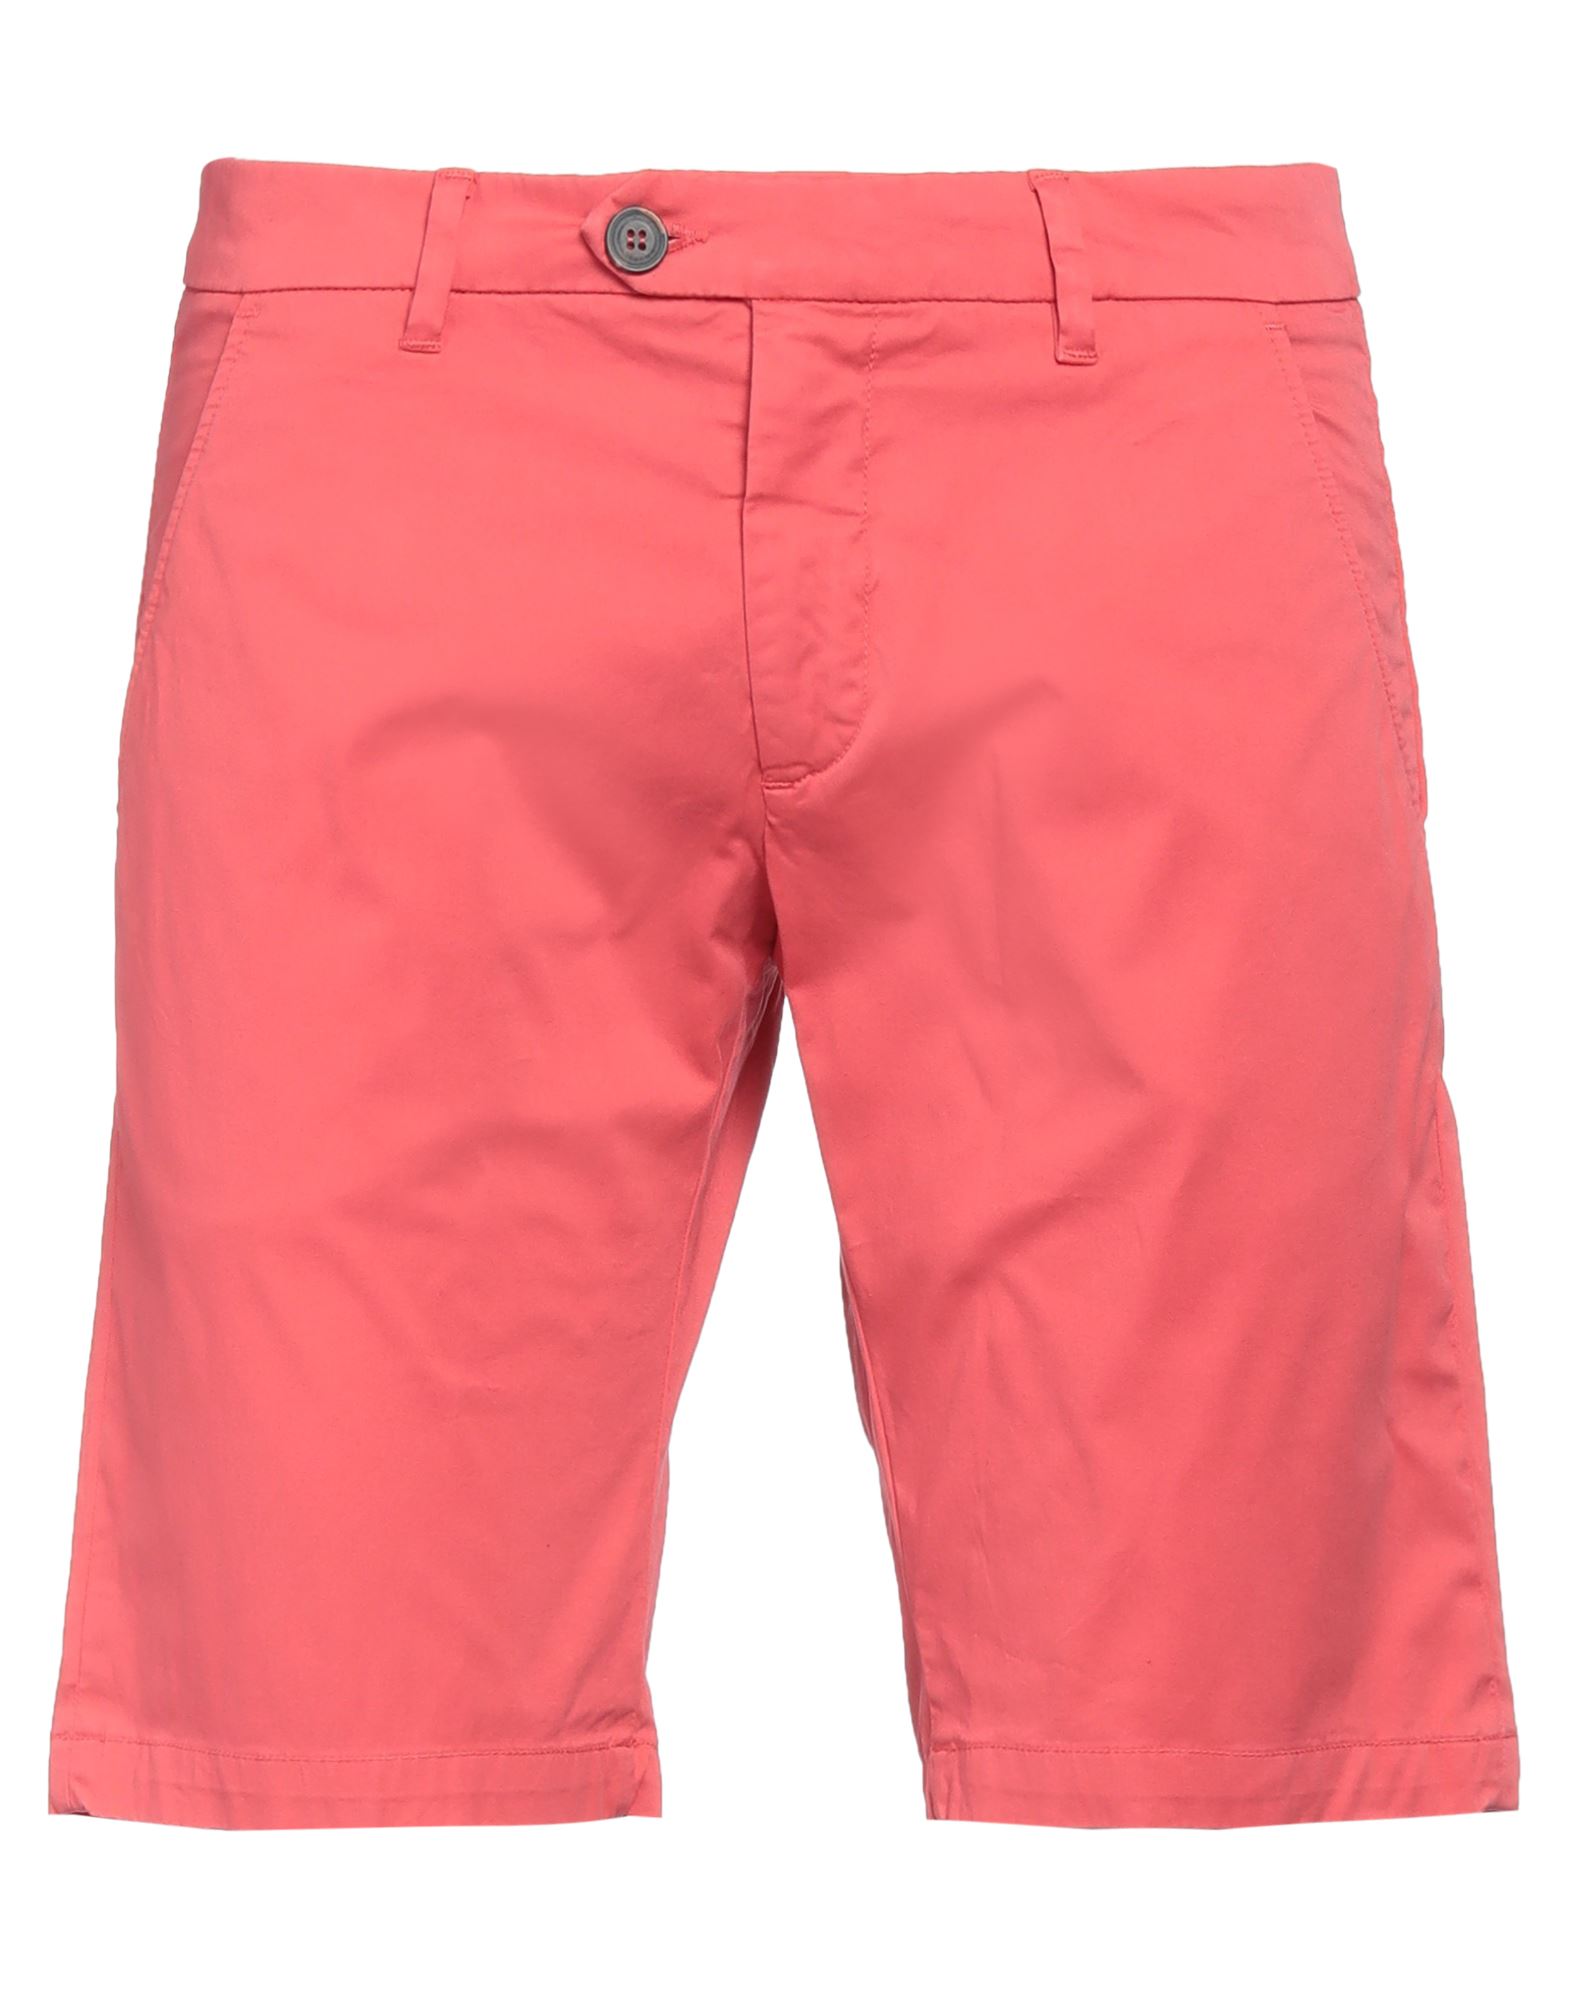 Roy Rogers Roÿ Roger's Man Shorts & Bermuda Shorts Coral Size 31 Cotton, Elastane In Red